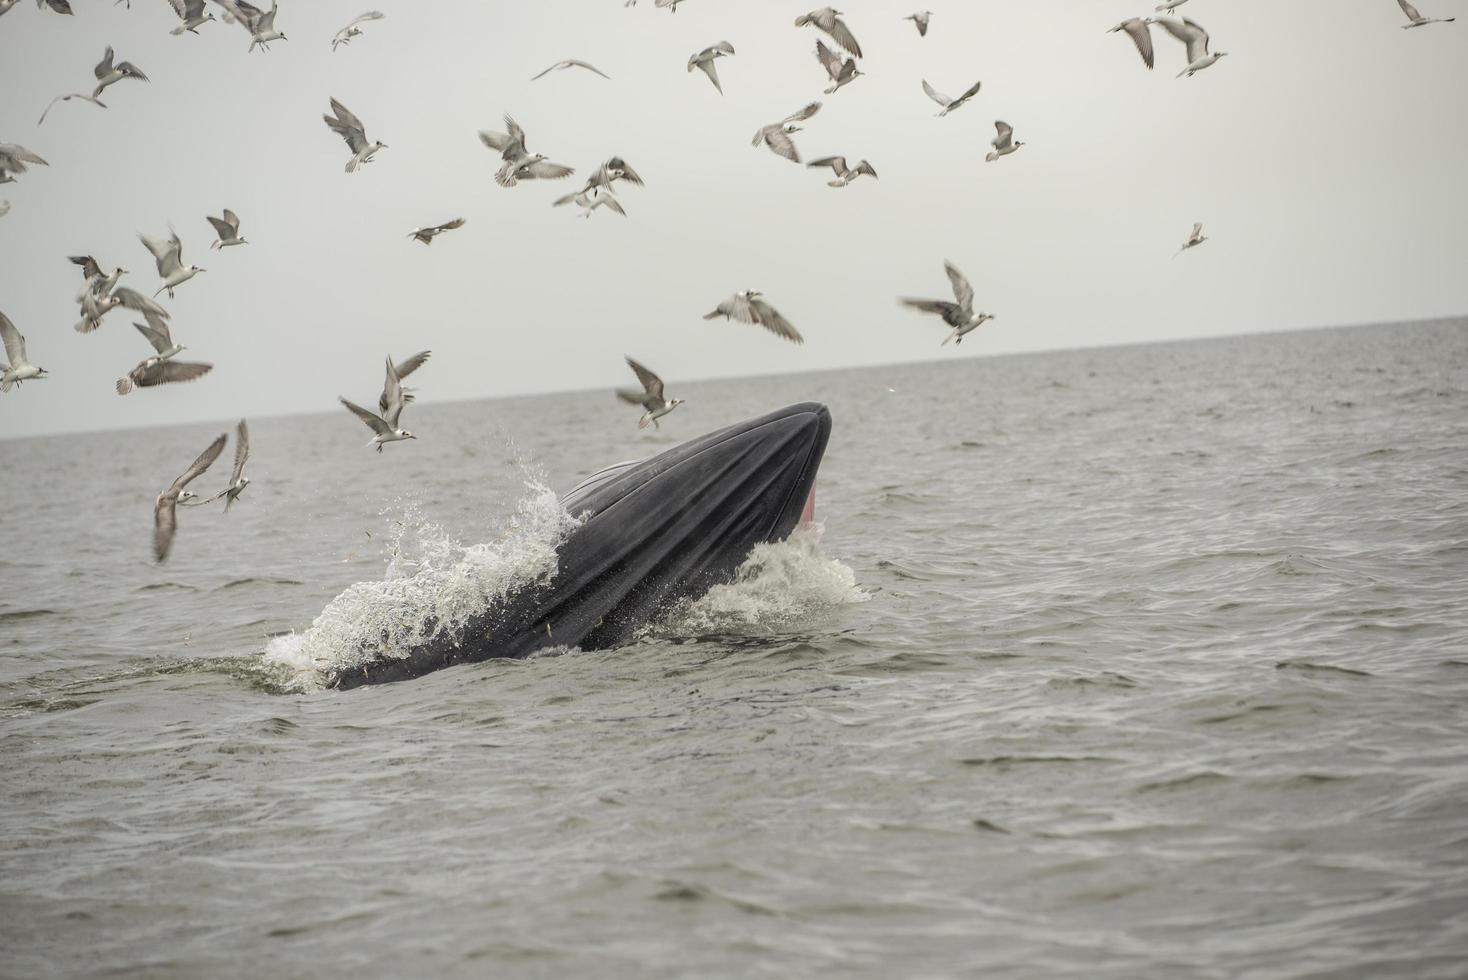 Bryde's whale, Eden's whale, Eating fish at gulf of Thailand. photo